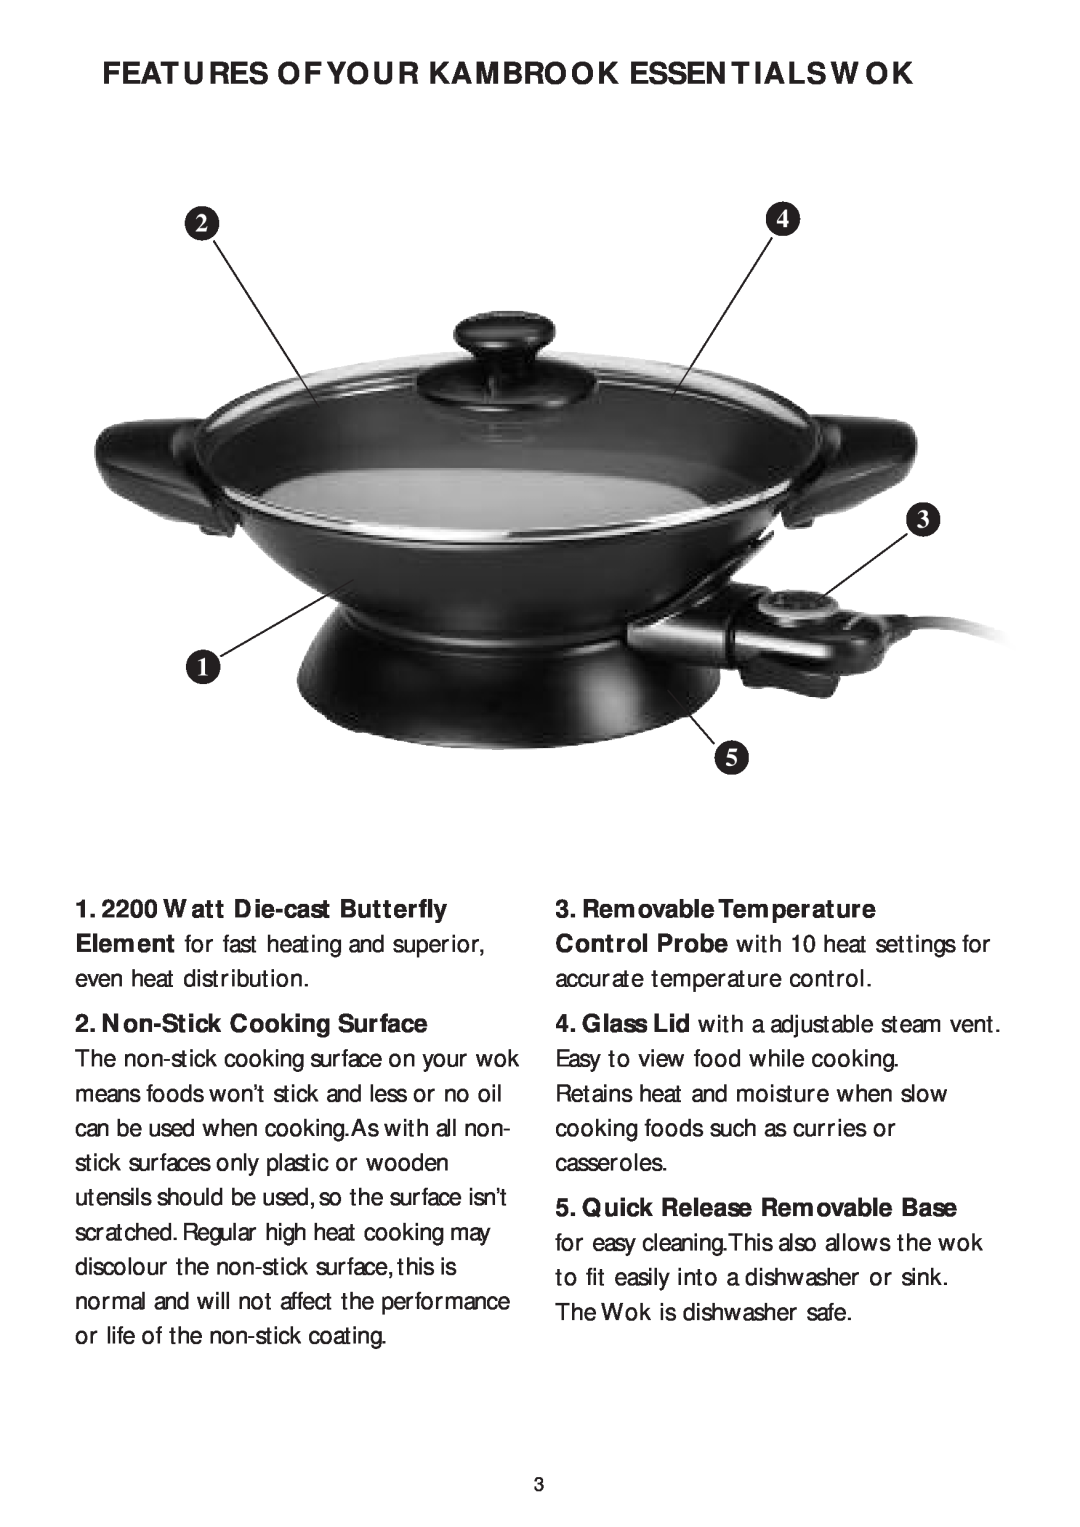 Kambrook KEW5 manual Features Of Your Kambrook Essentials Wok, Non-Stick Cooking Surface, Removable Temperature 